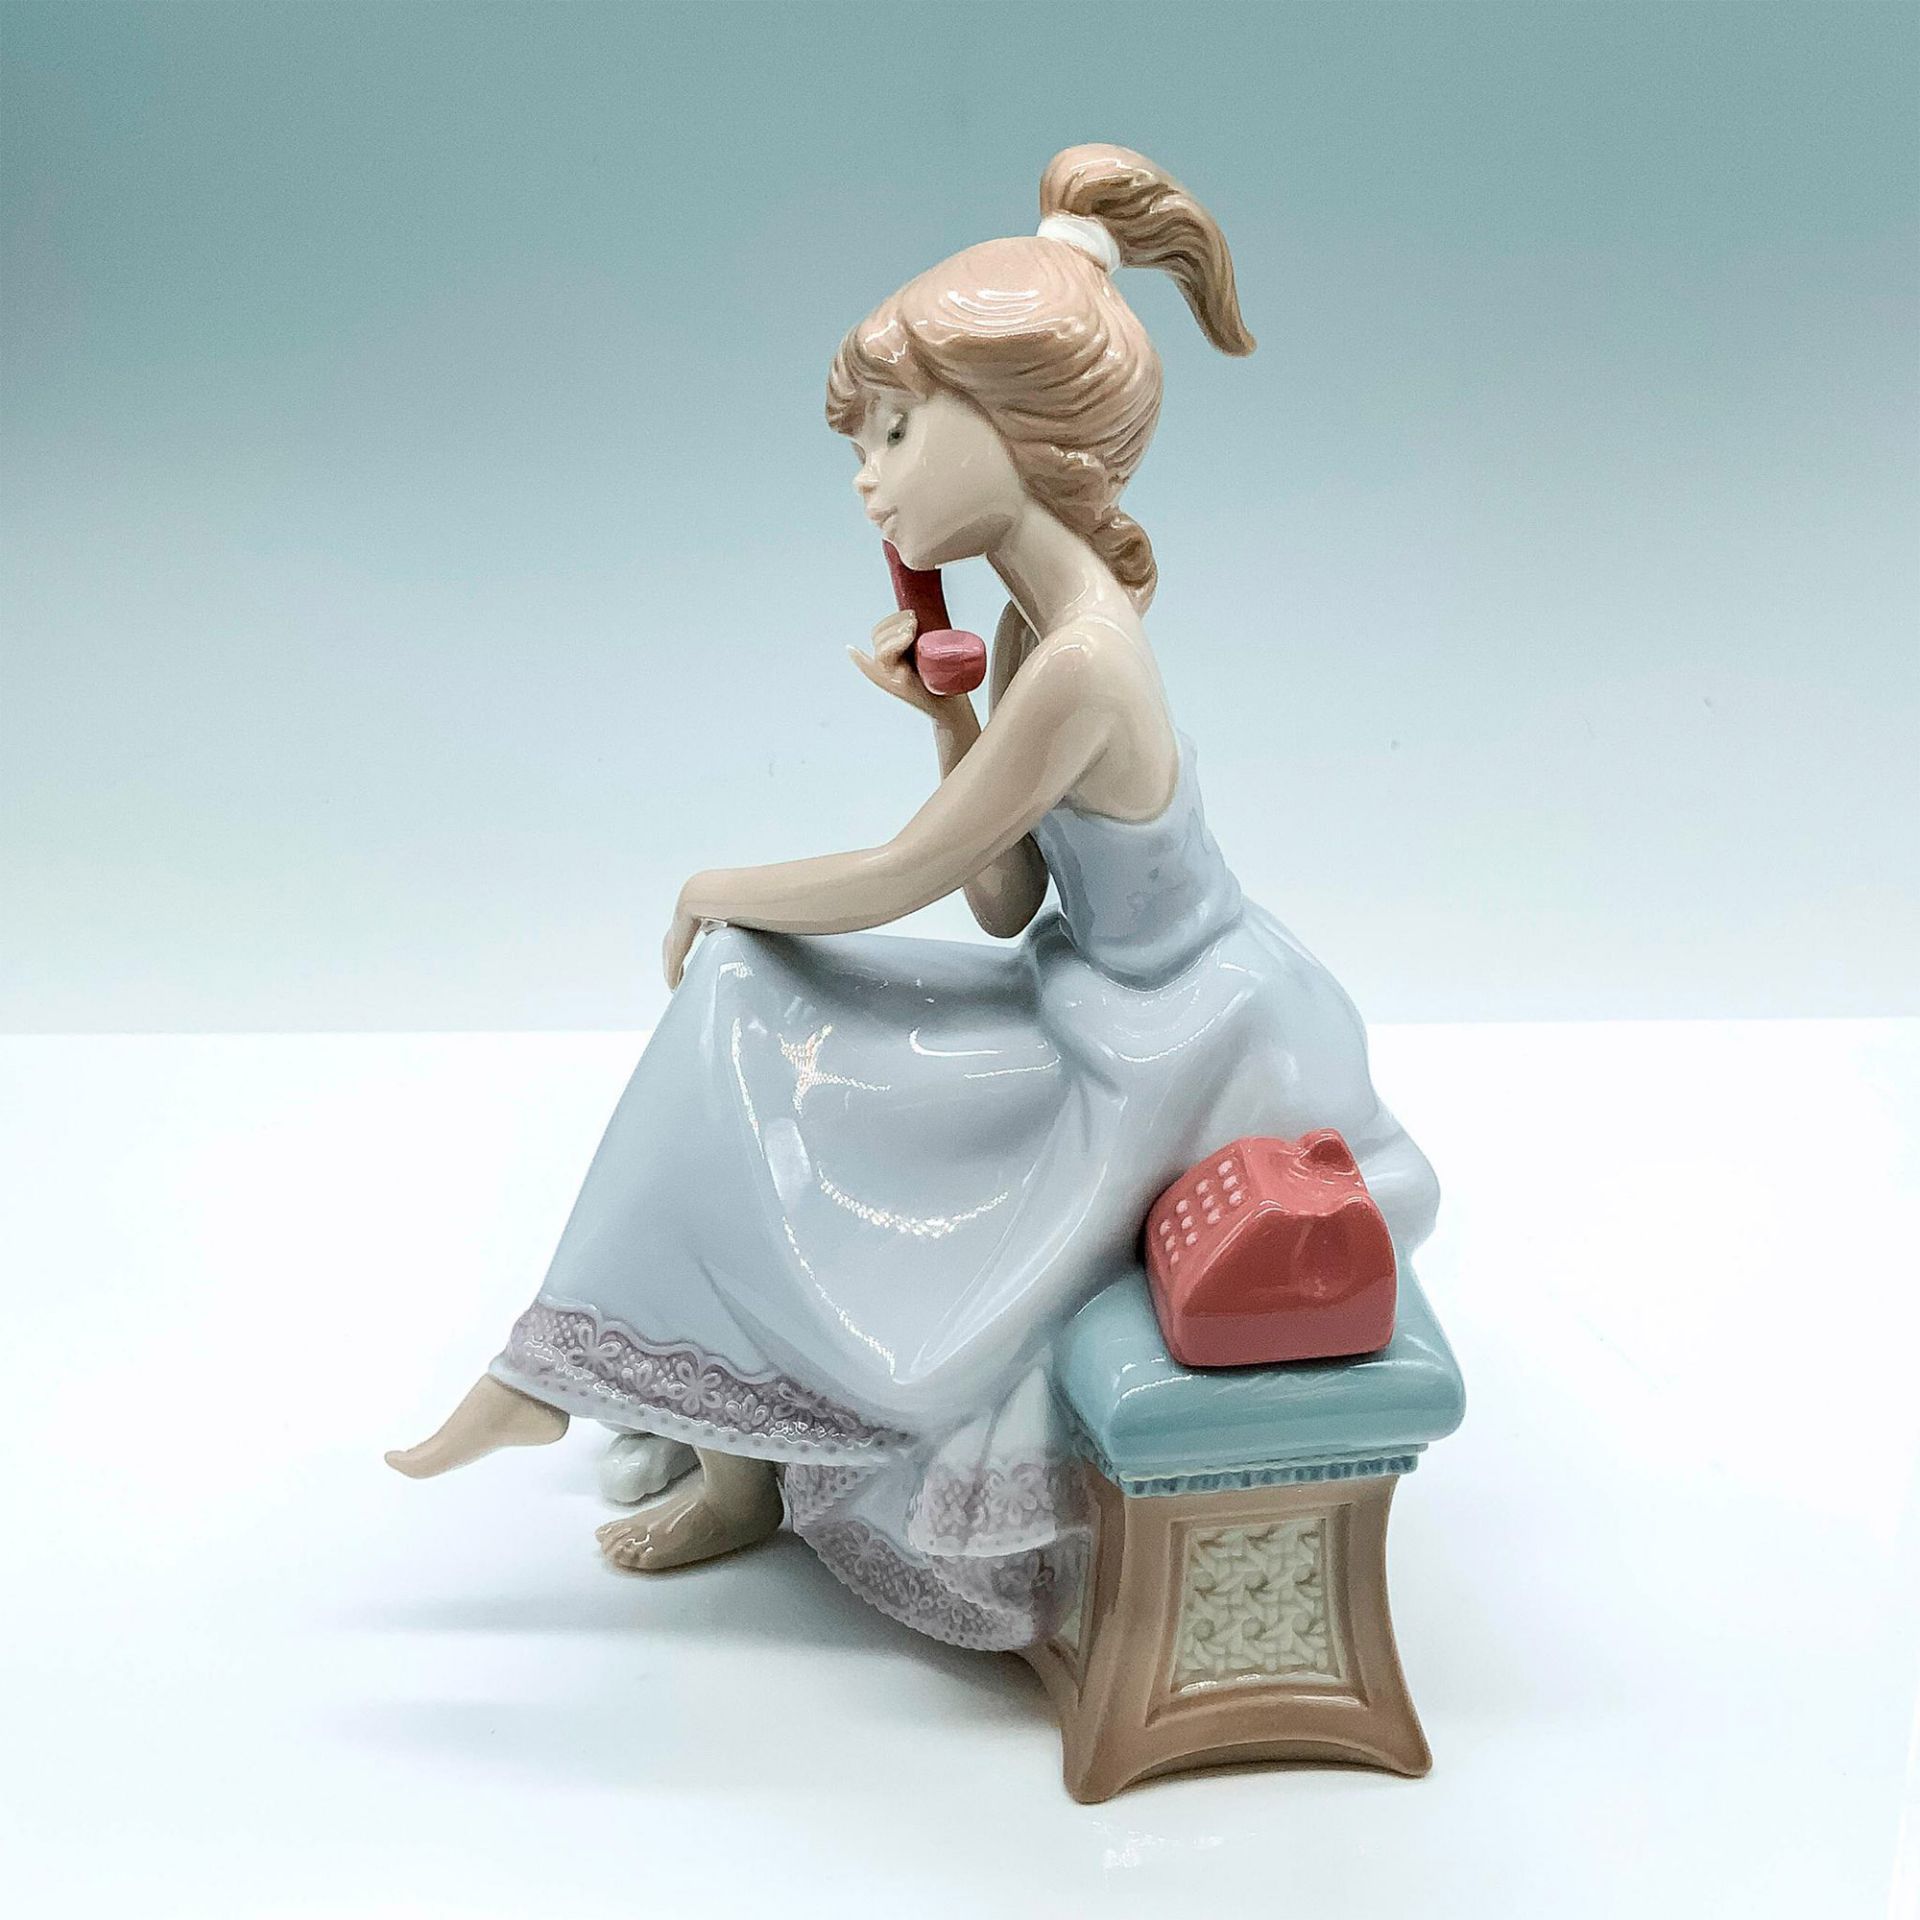 Chit-chat 1005466 - Lladro Porcelain Figurine - Image 2 of 5